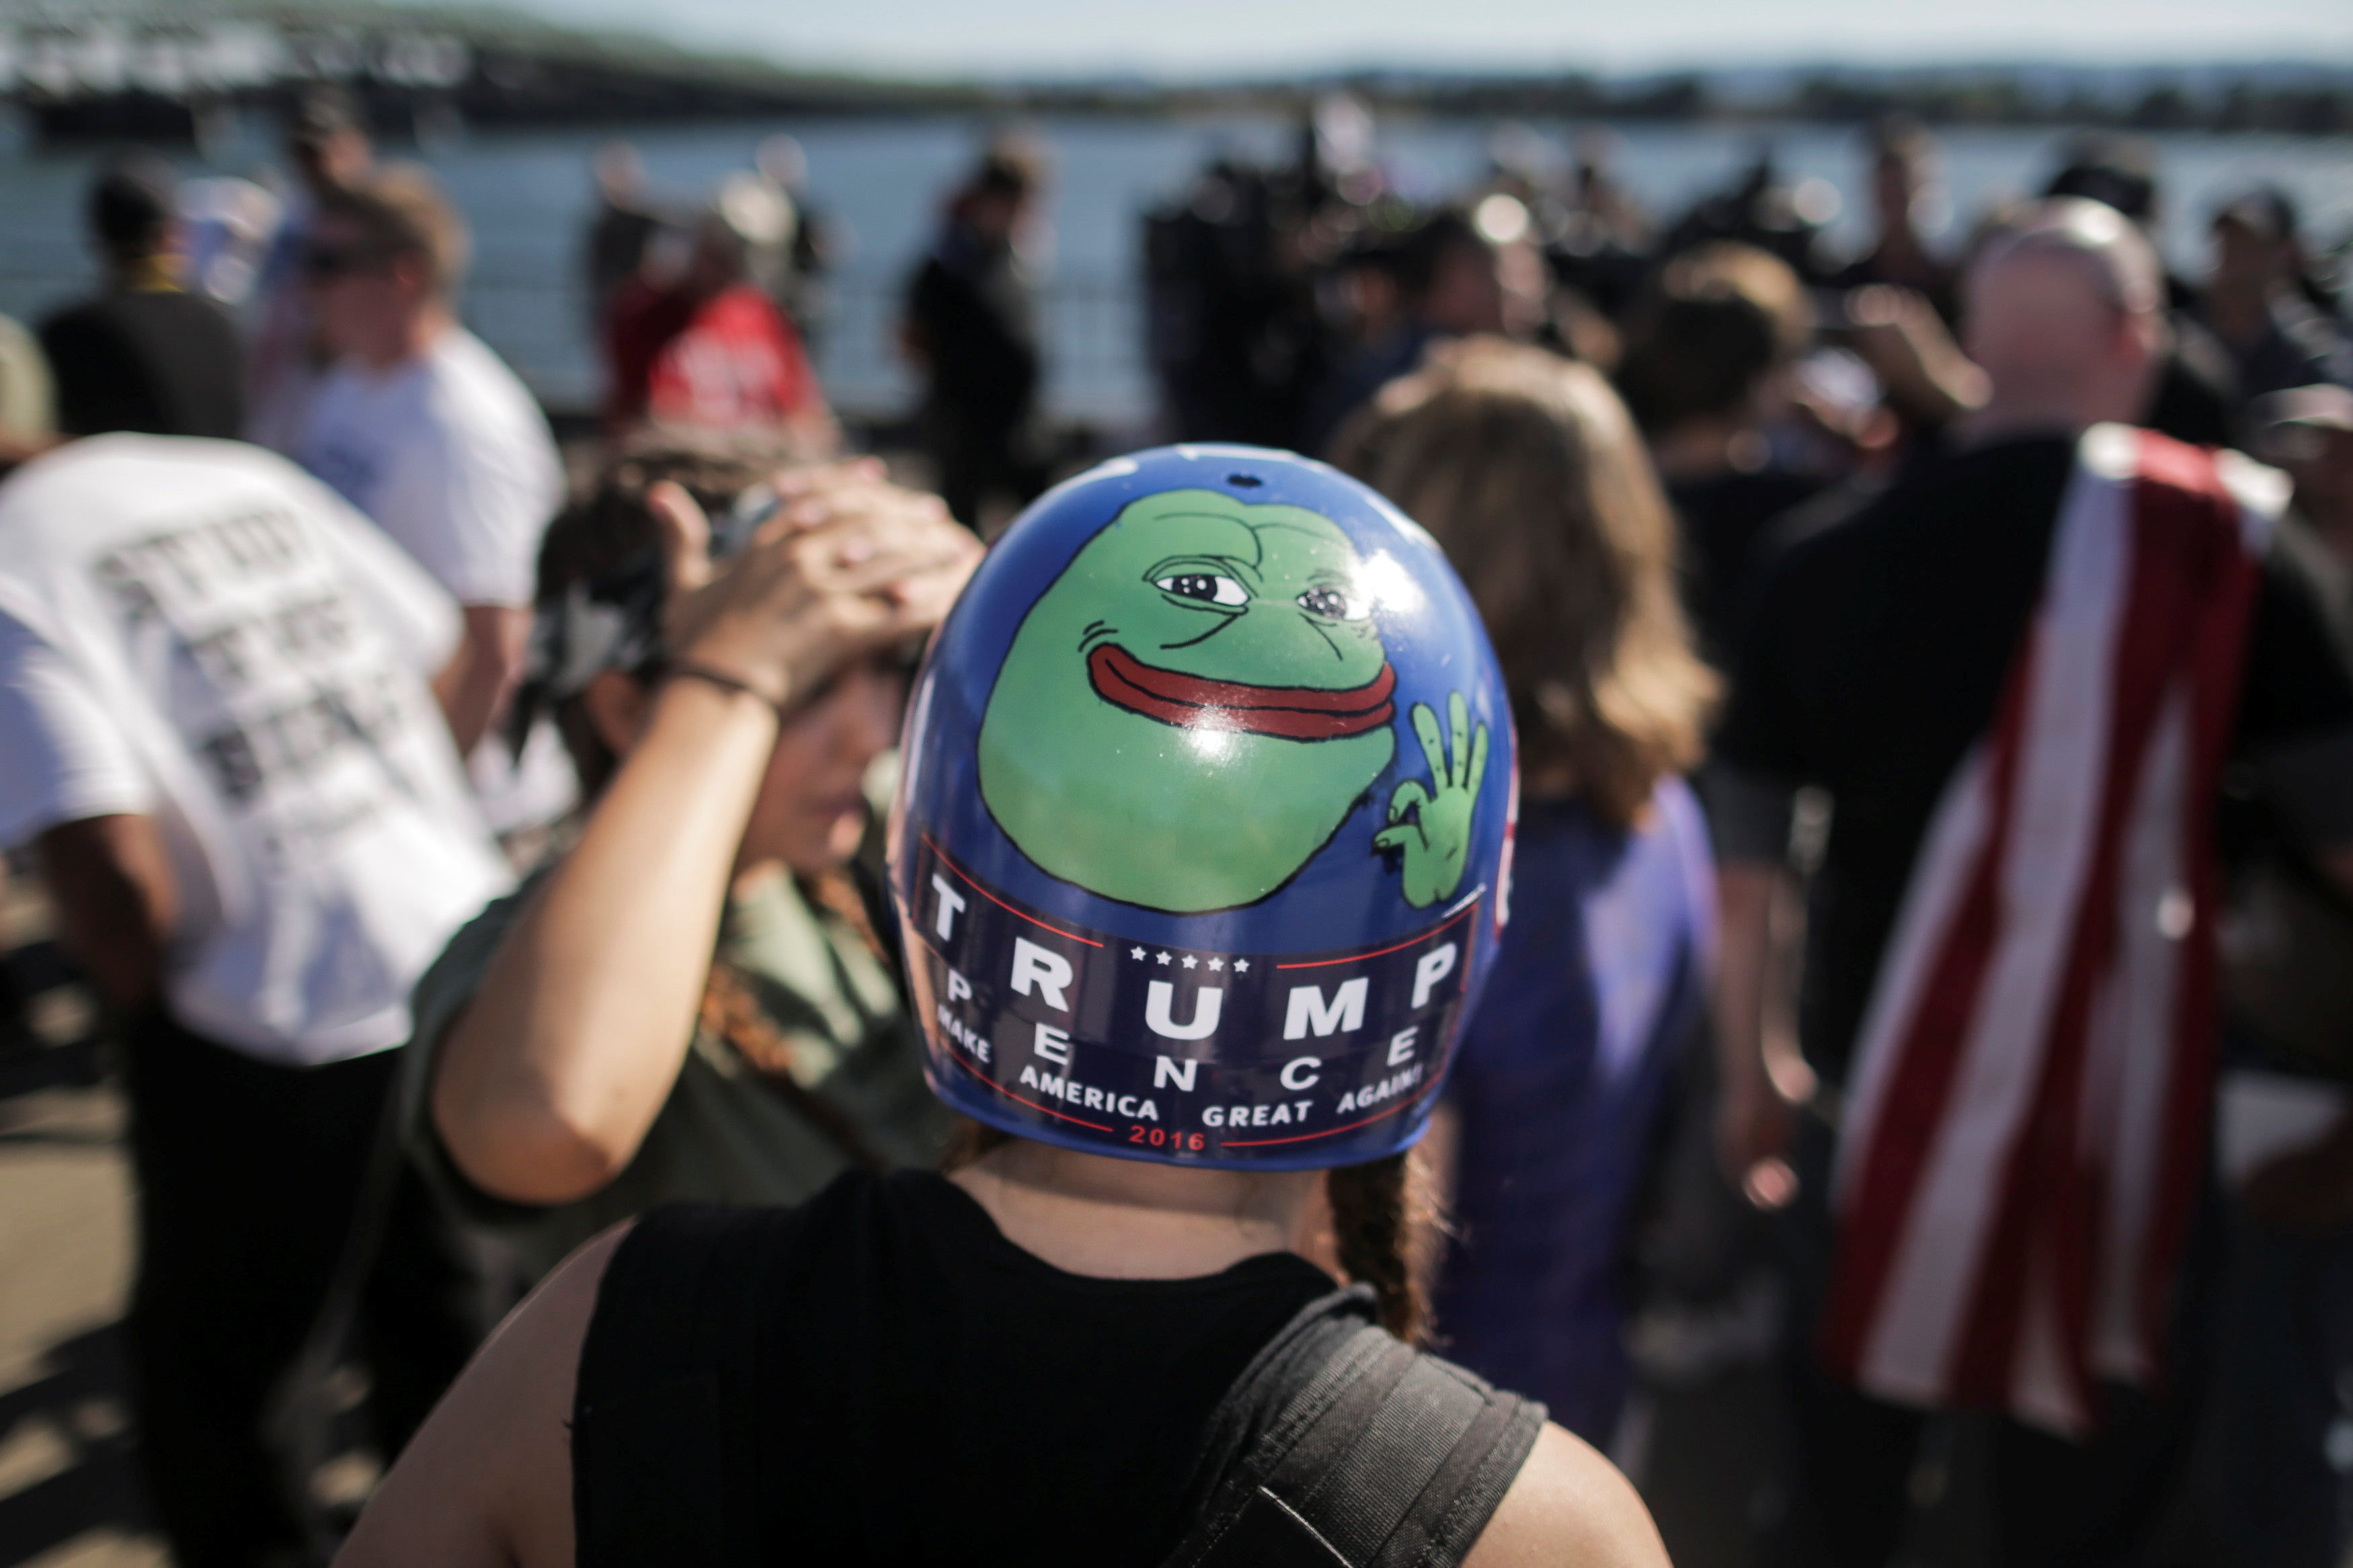 A Trump supporter wears a helmet with a hand-painted Pepe the Frog image.